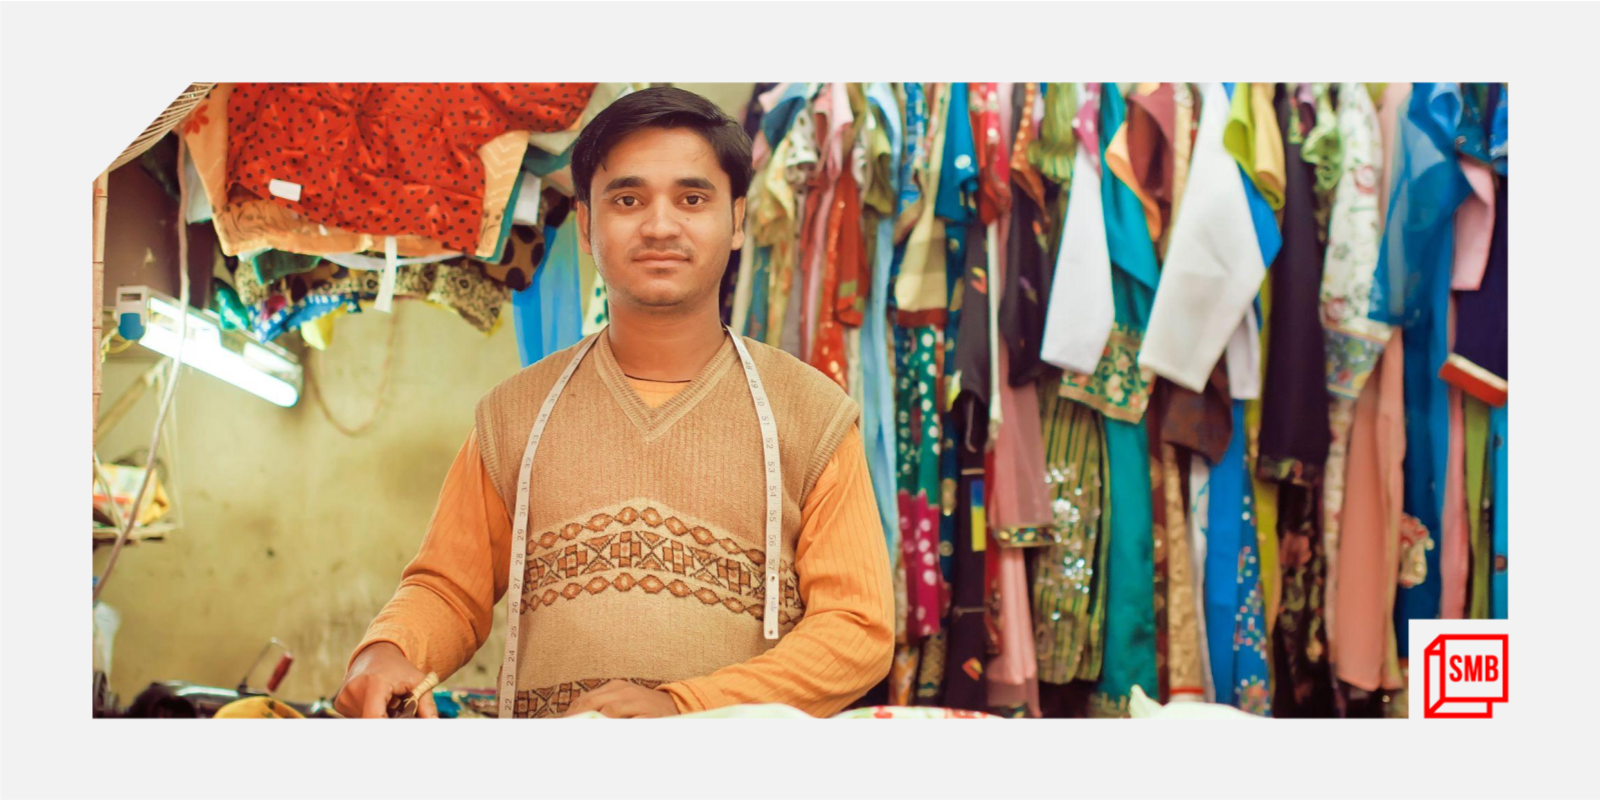 The power of digital B2B networking: How apparel MSMEs can thrive online
